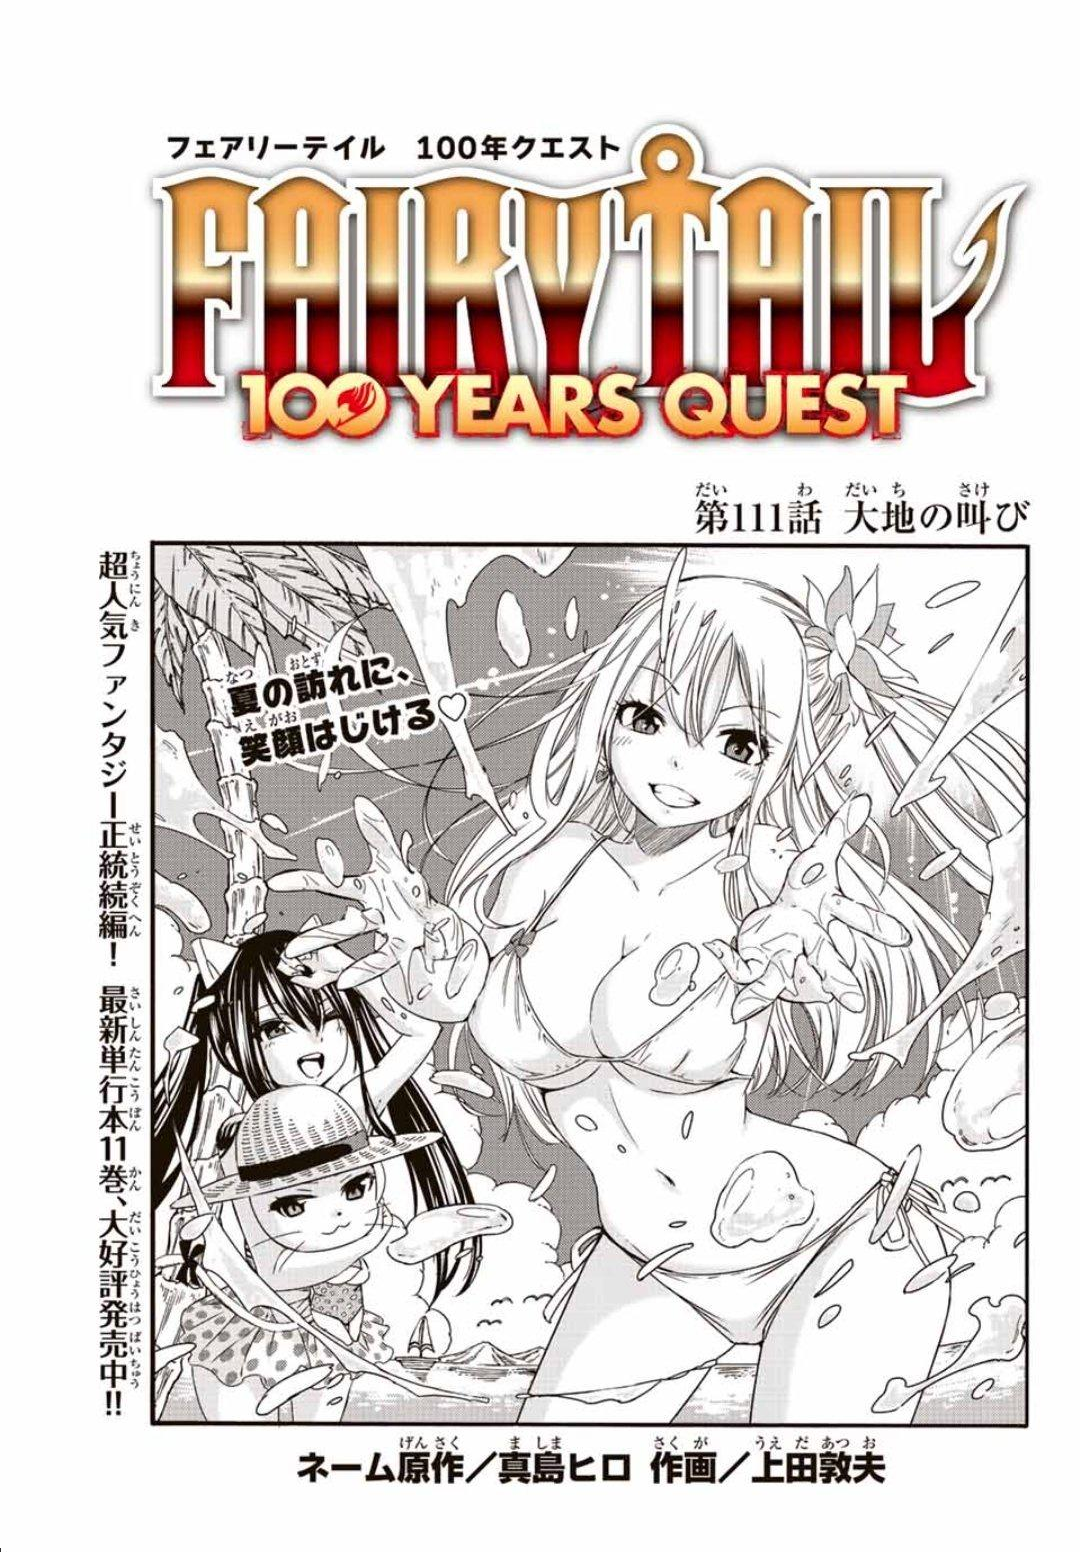 Volumes and Chapters, Fairy Tail Wiki, Fandom